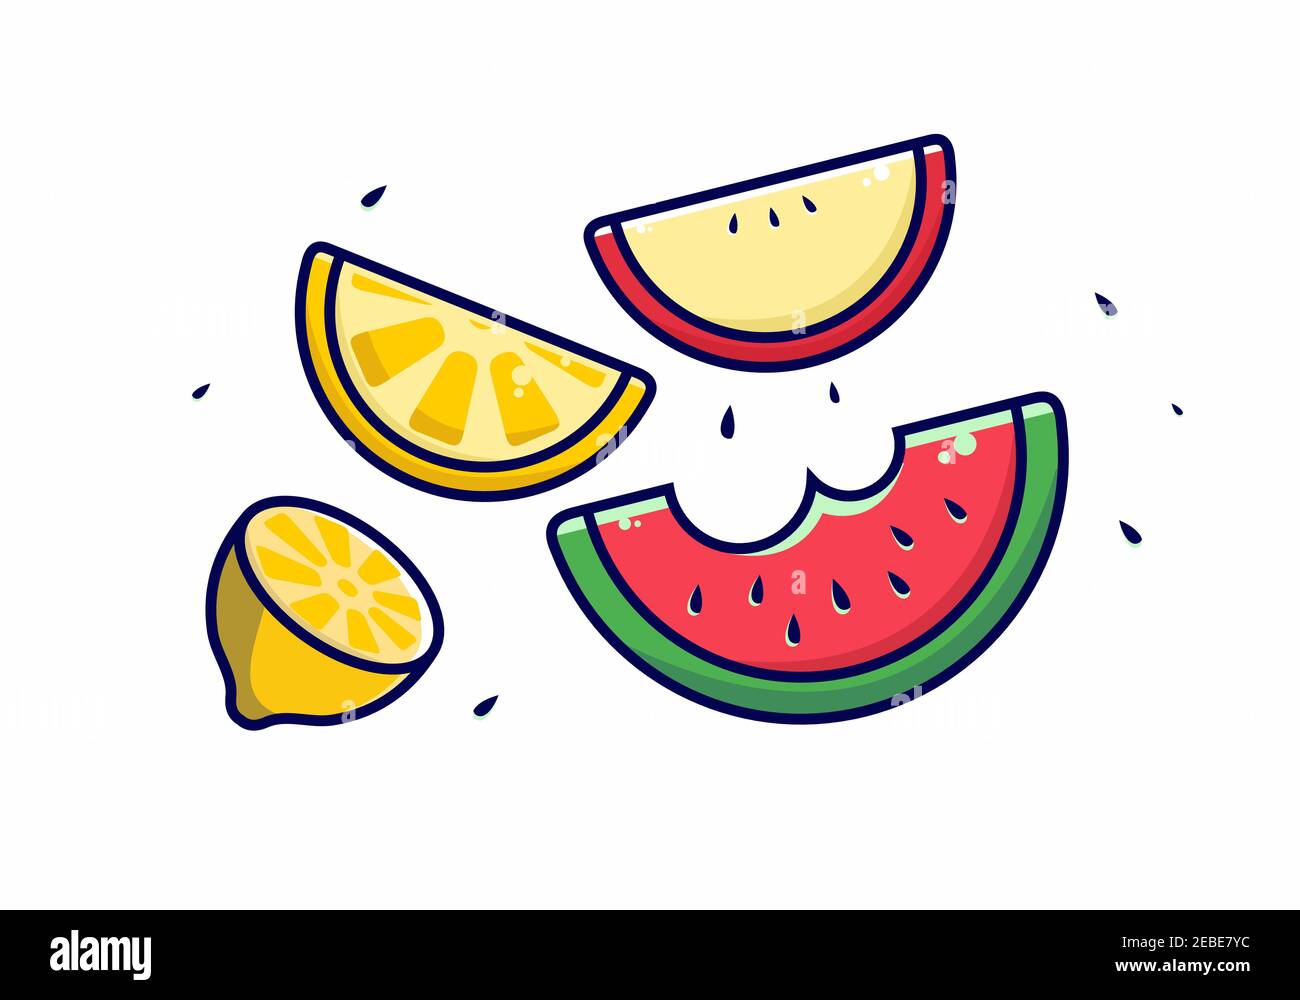 Pieces of watermelon, oranges, lemons and apples design Stock Vector